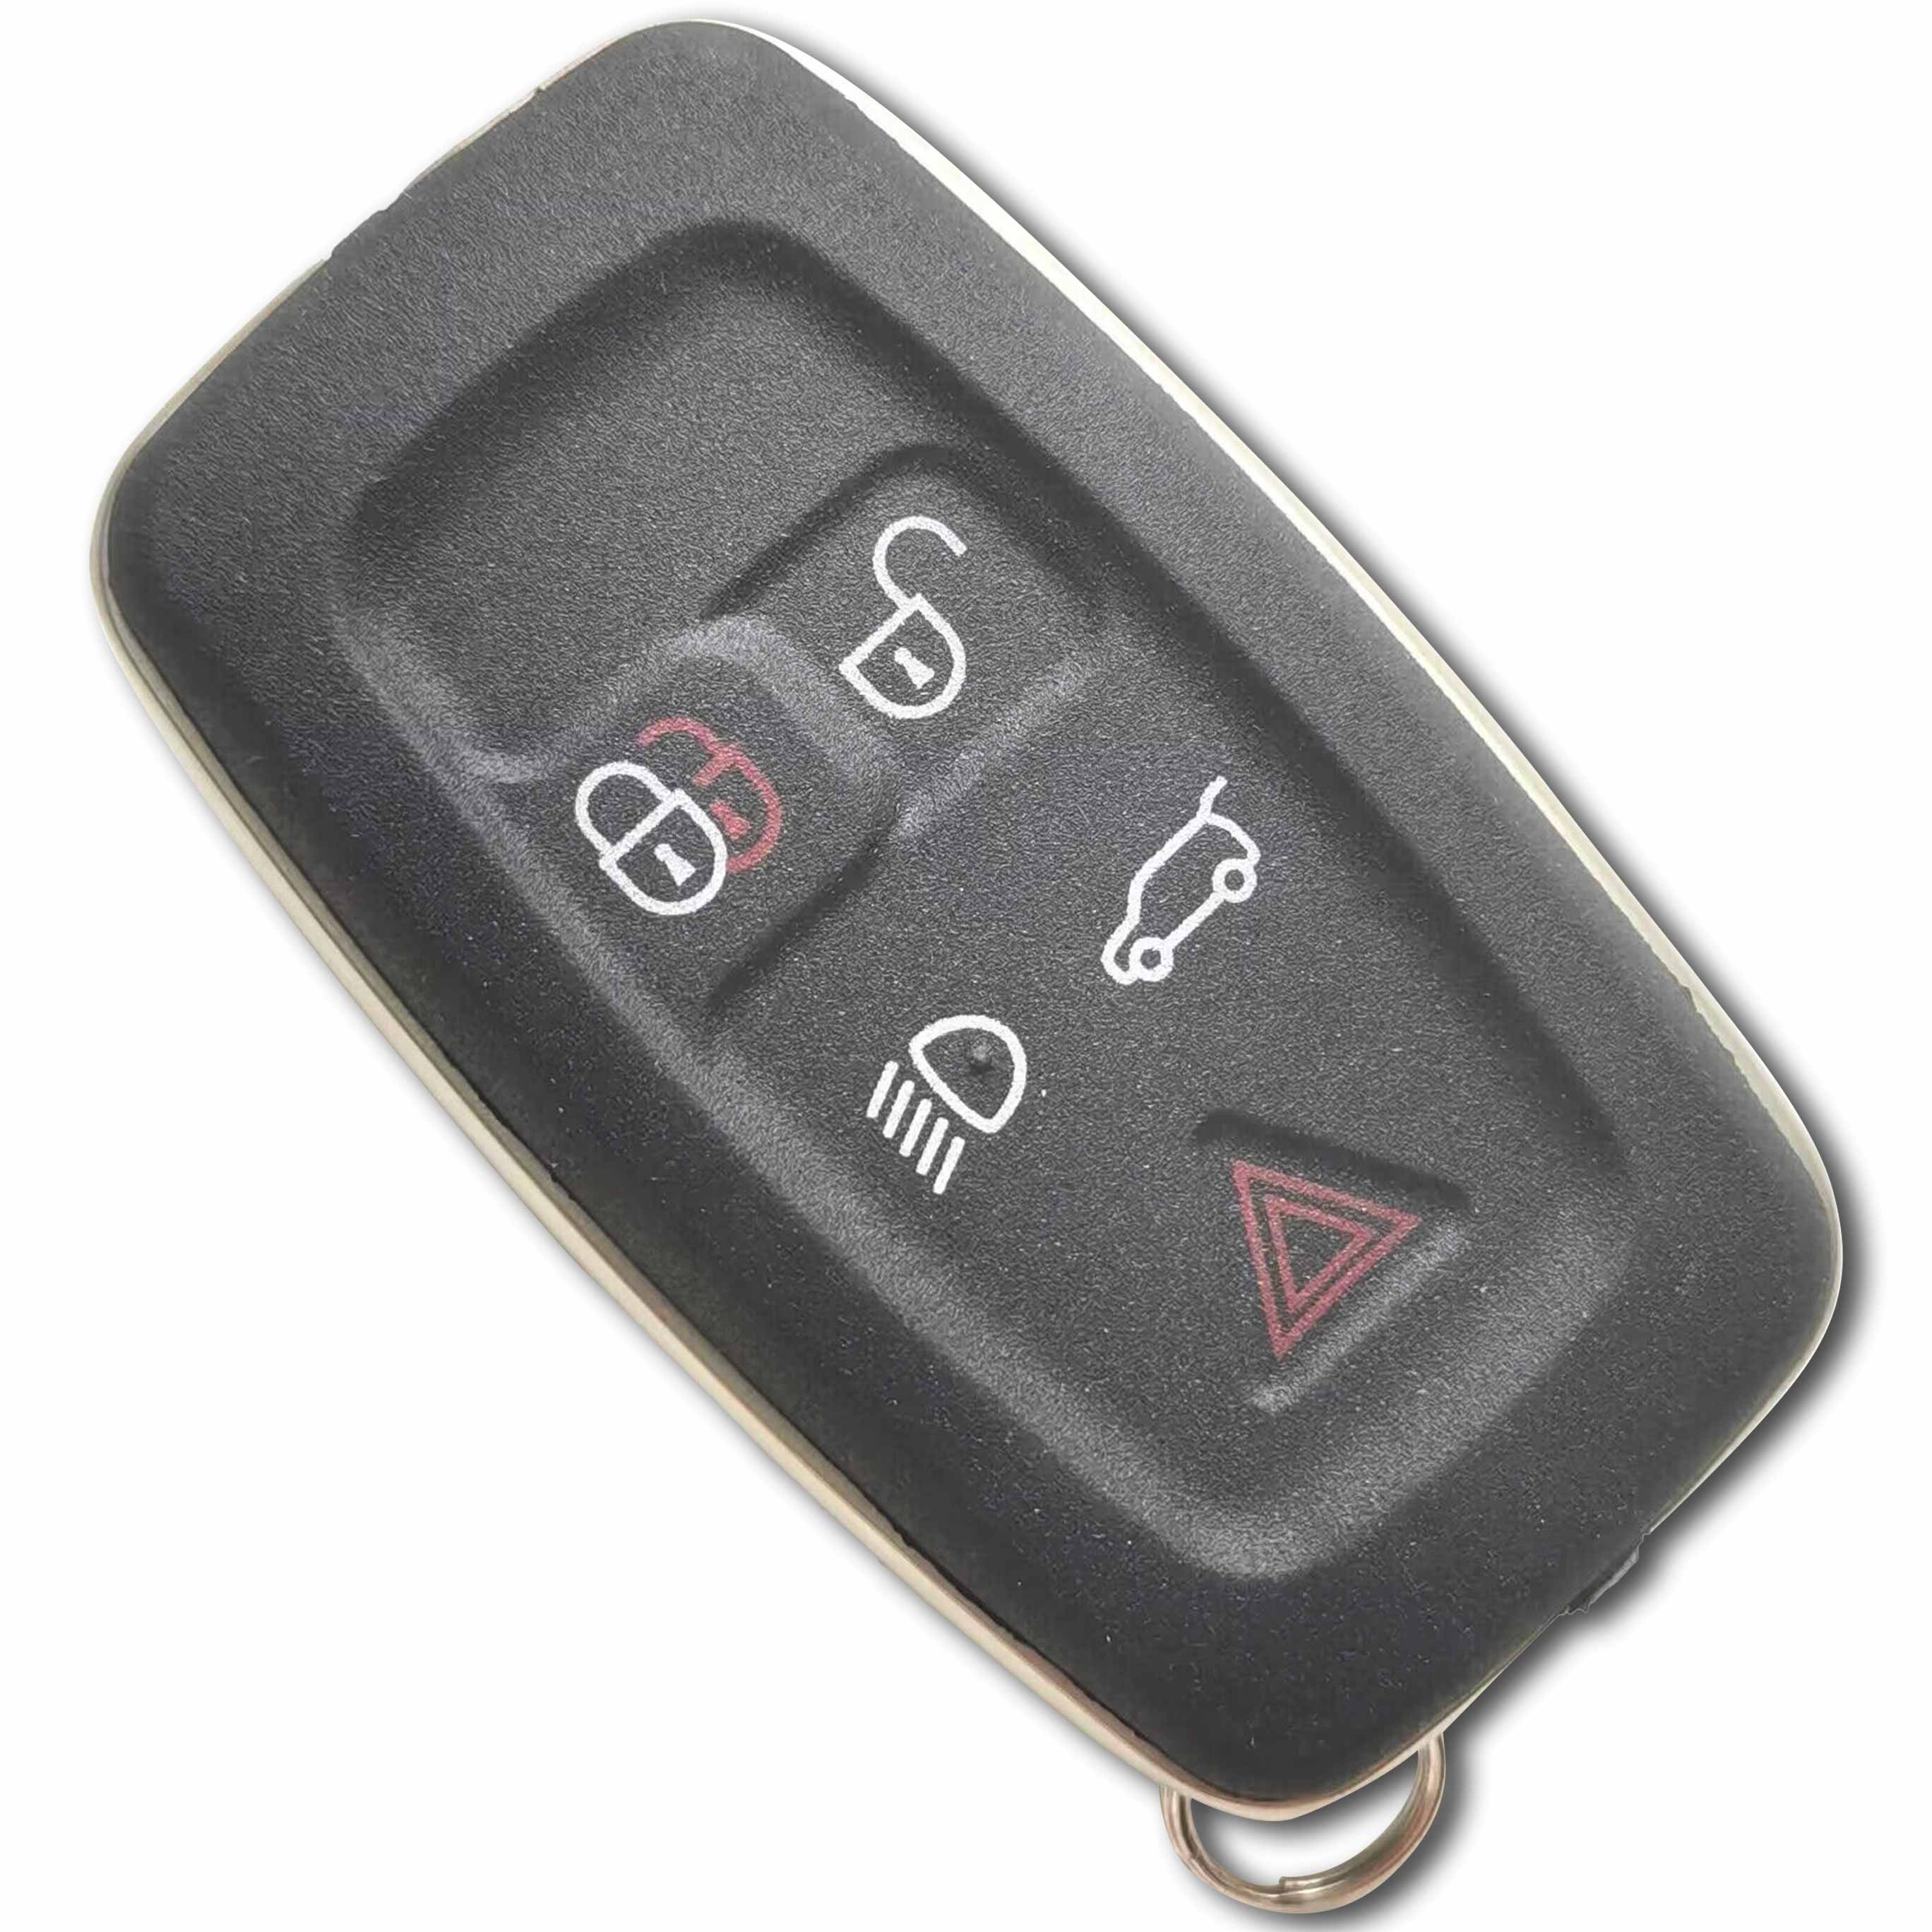 315 MHz Smart Key for 2009 ~ 2011 Discovery 4 / Range Rover Sport